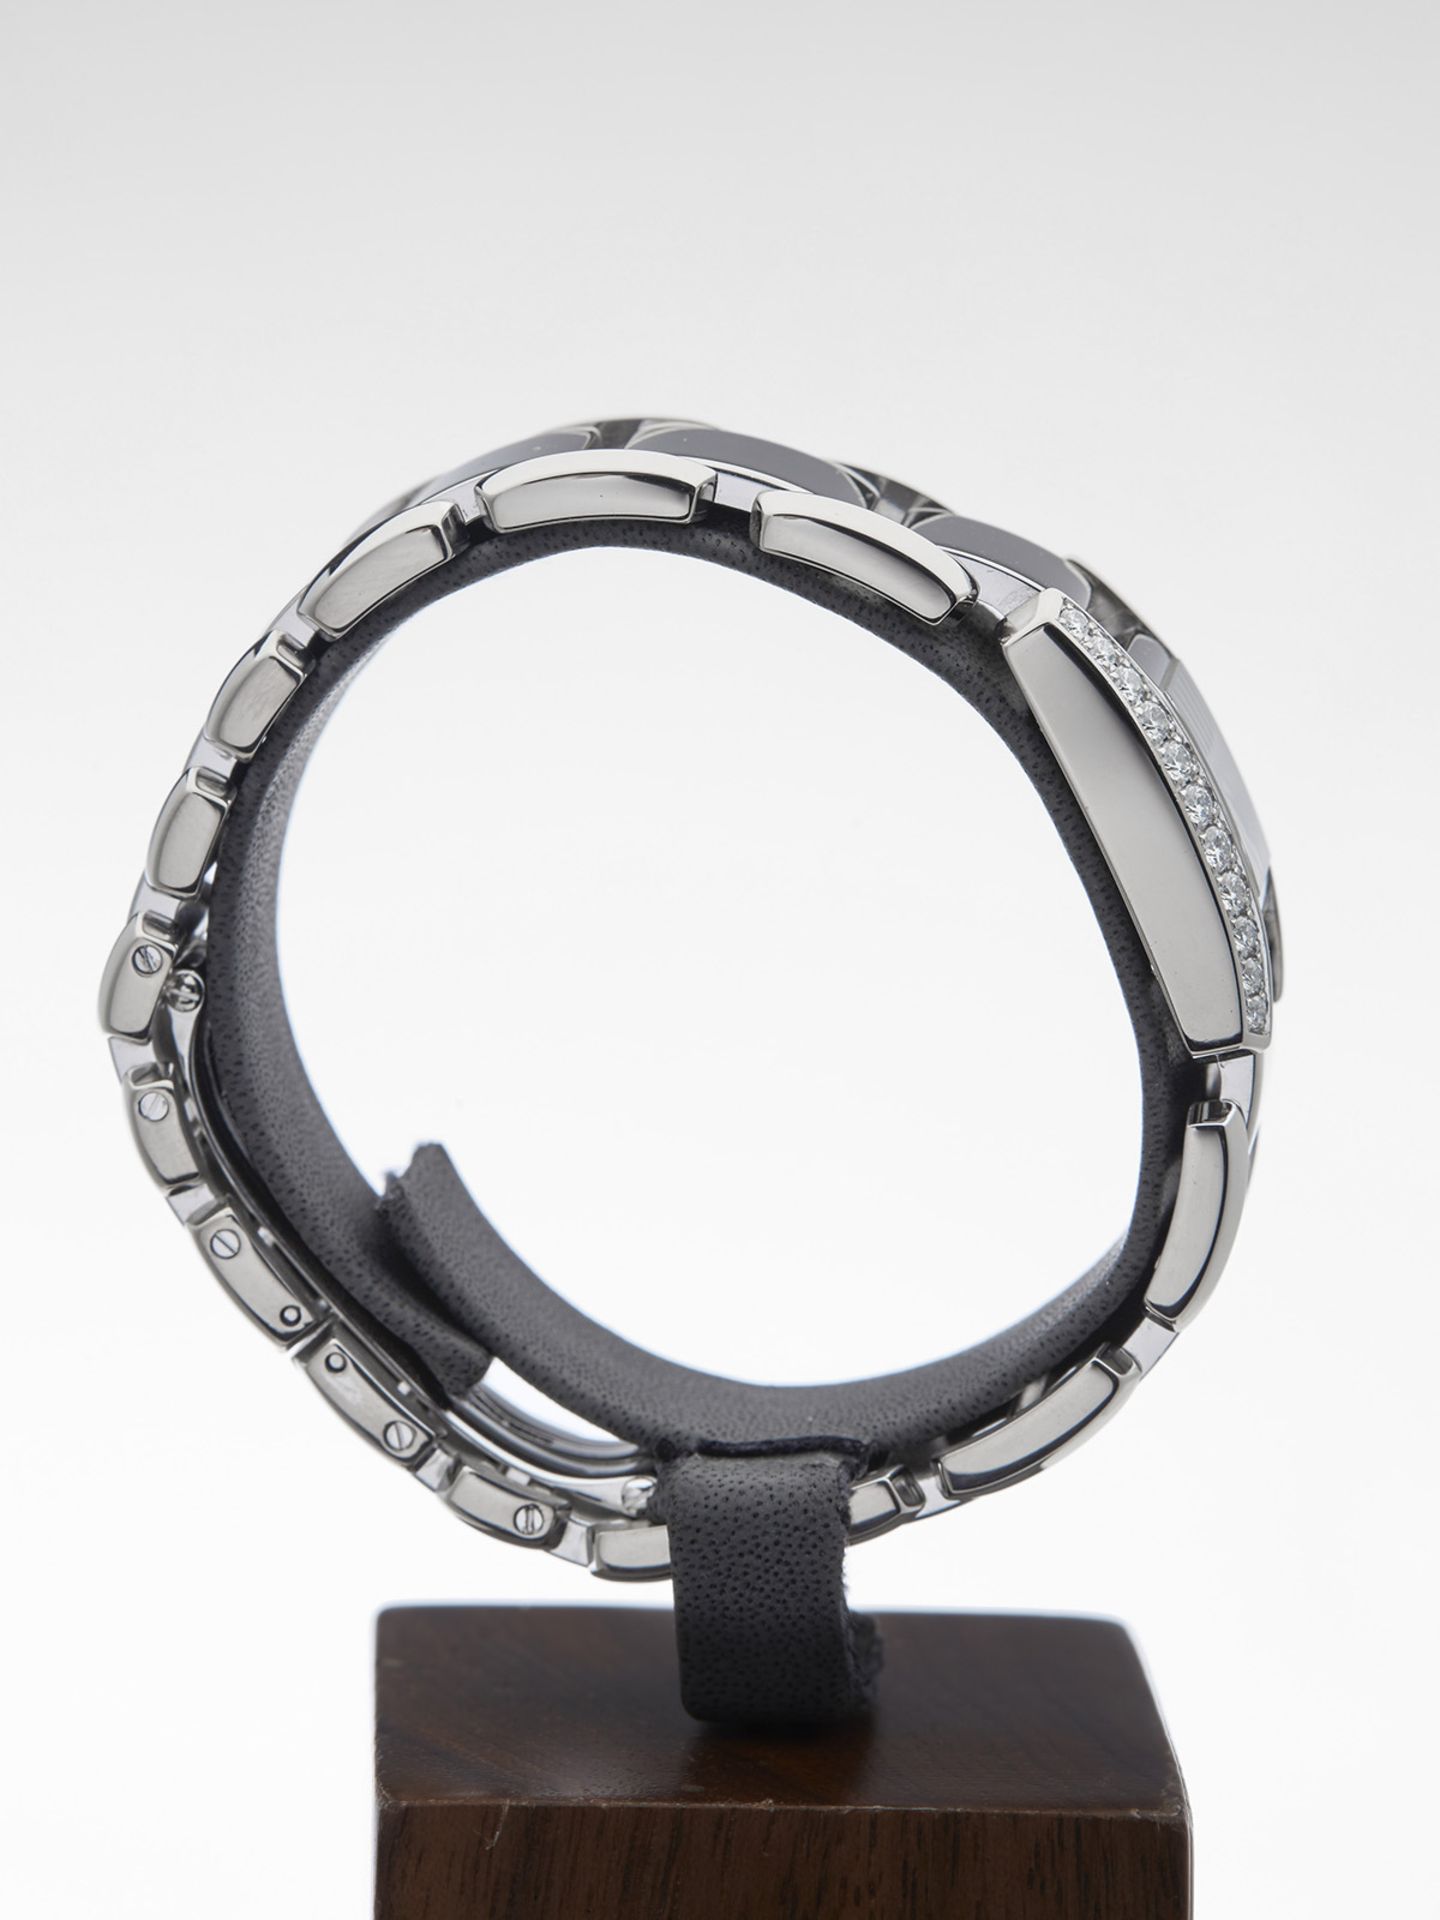 Cartier Tankissime 16mm 18k White Gold 2831 - Image 6 of 8